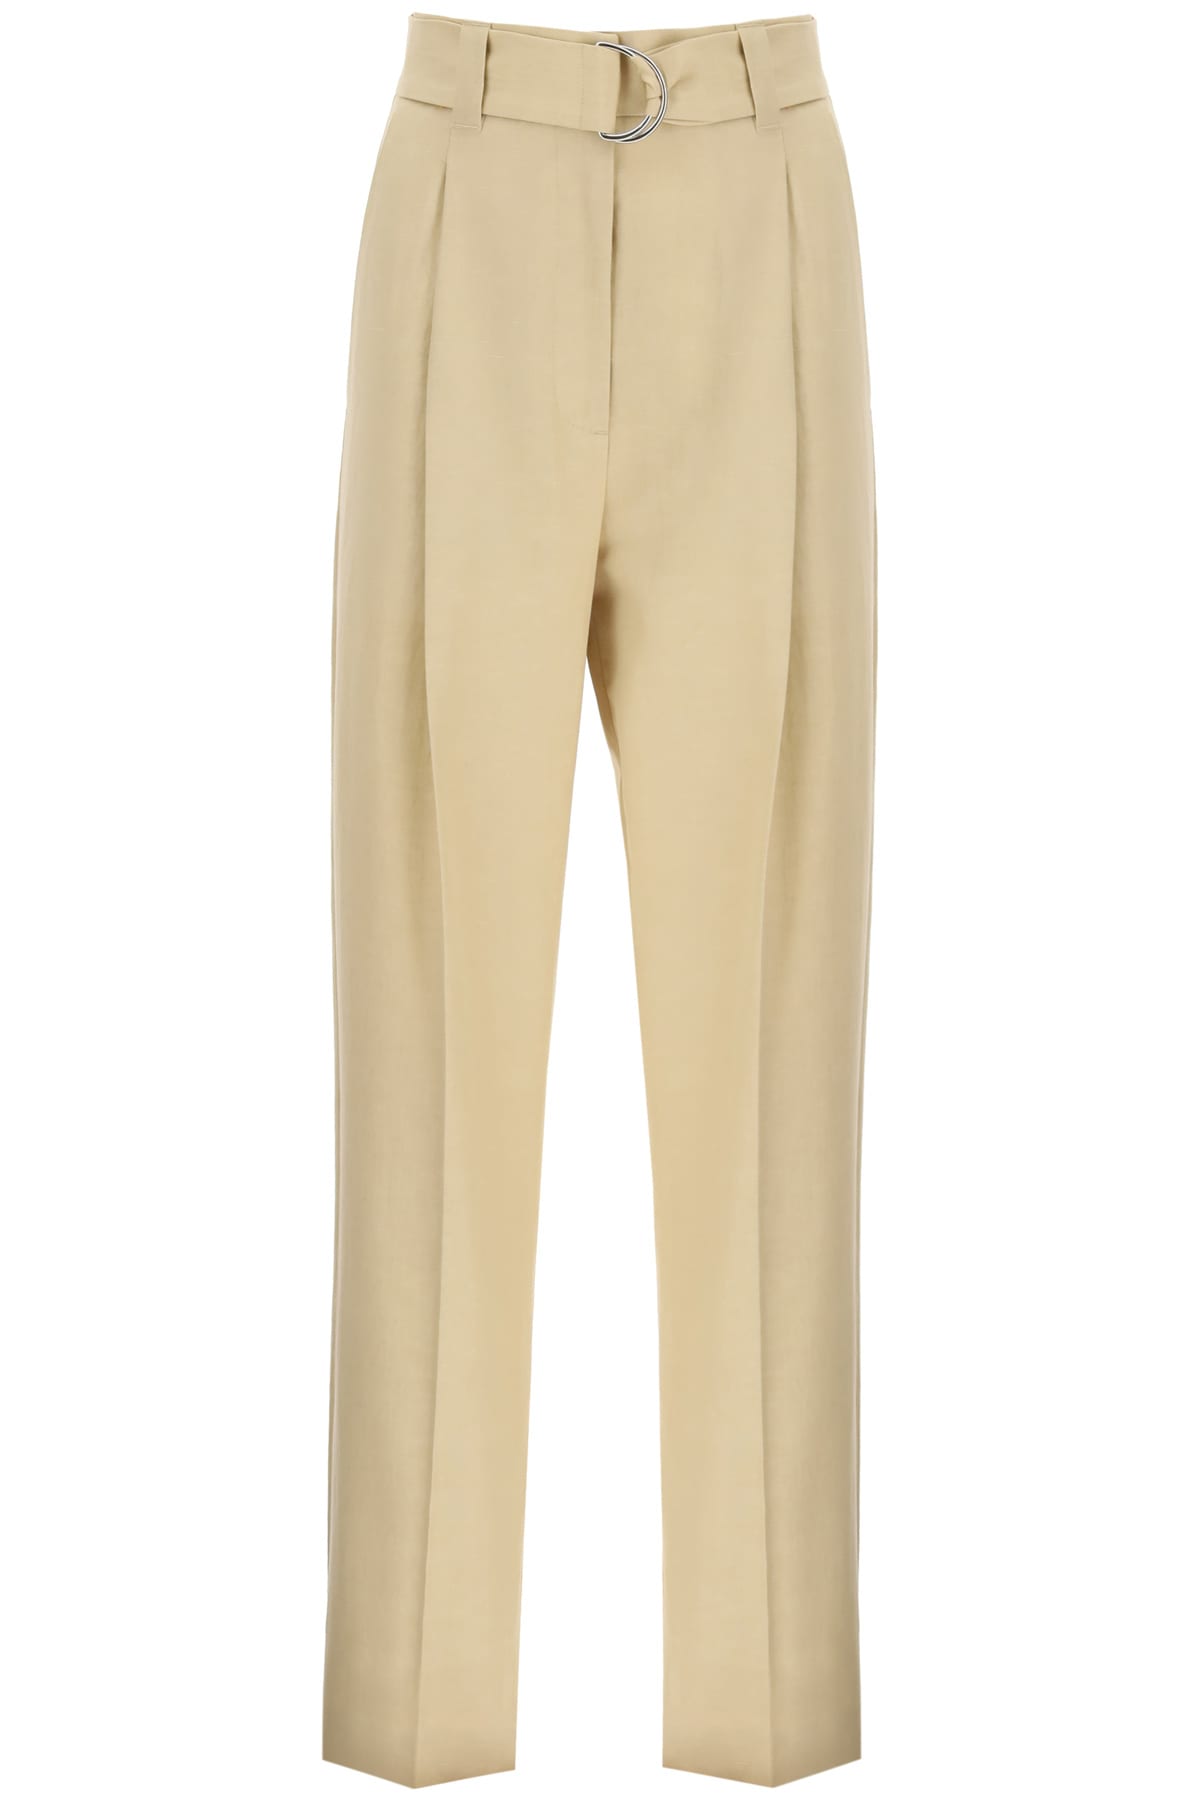 MSGM Belted Wide Leg Trousers